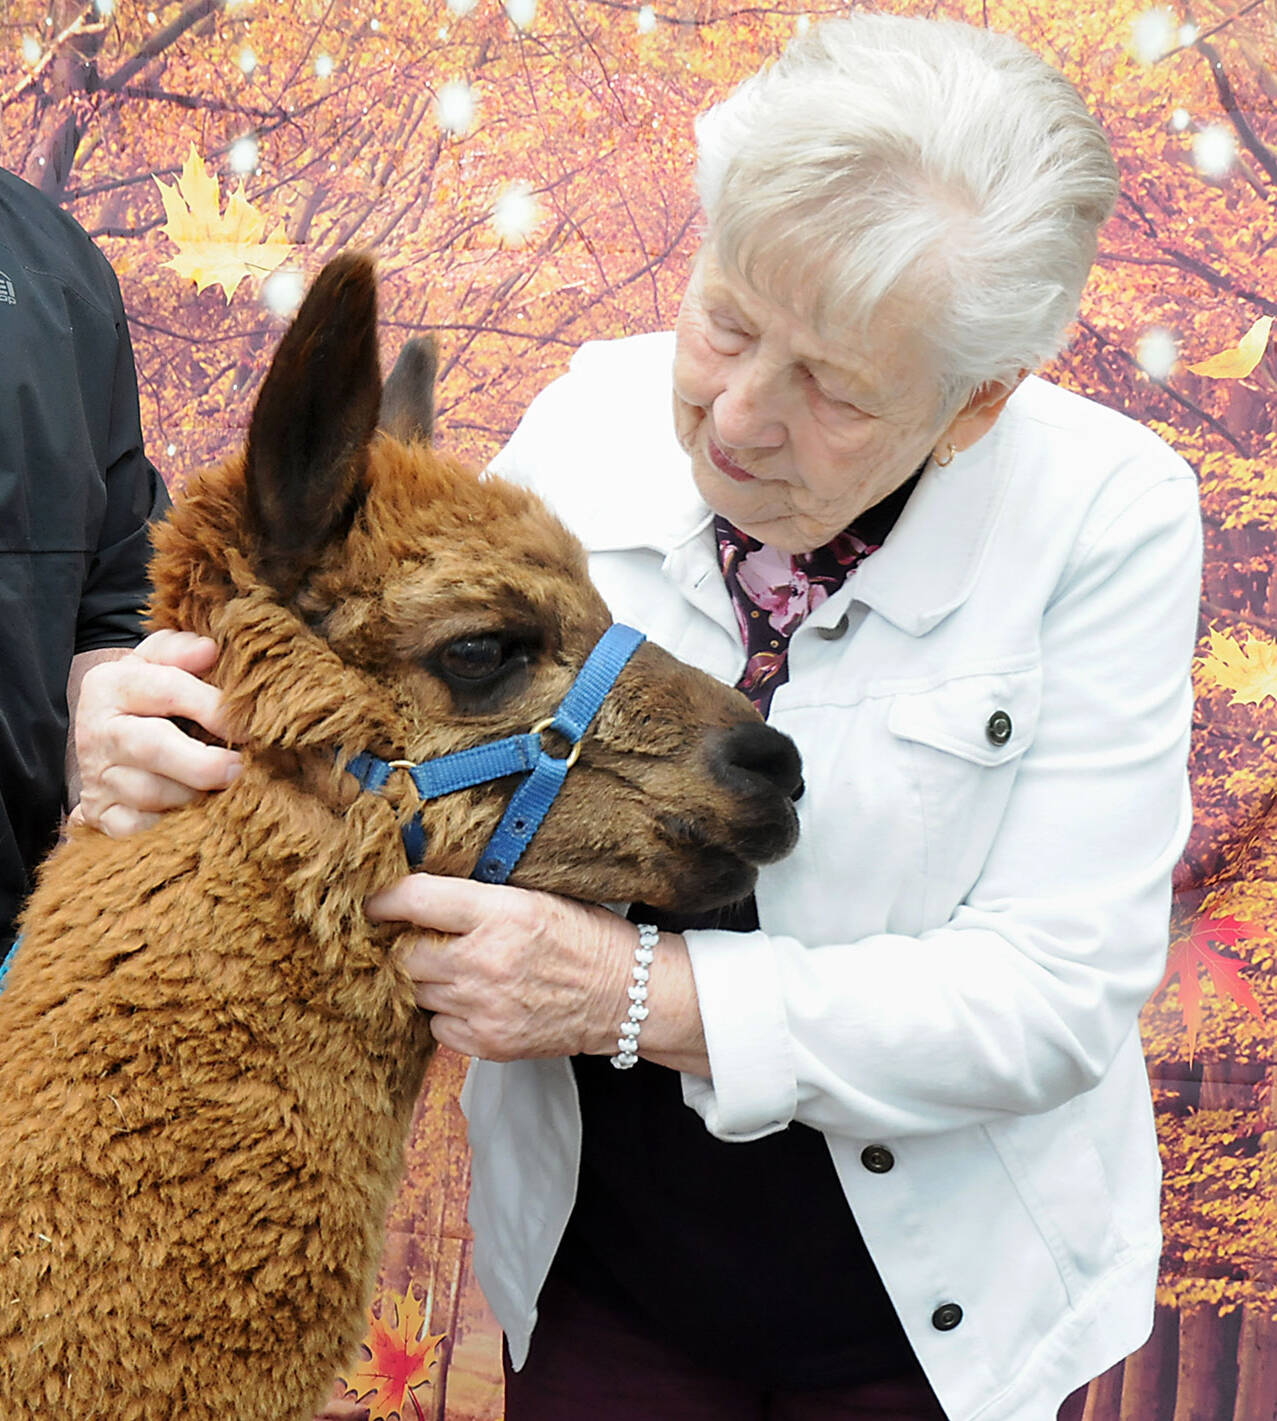 Darlene Pittsley of Port Angeles gives some attention to Rosie, an alpaca, during a fundraising flea market to benefit the non-profit Olympic Peninsula Llama/Alpaca Rescue on Saturday at the Moose Lodge in Port Angeles. The three-day event, which also featured live demonstrations and photos with alpacas, was scheduled to correspond with National Alpaca Farm Days. (Keith Thorpe/Peninsula Daily News)